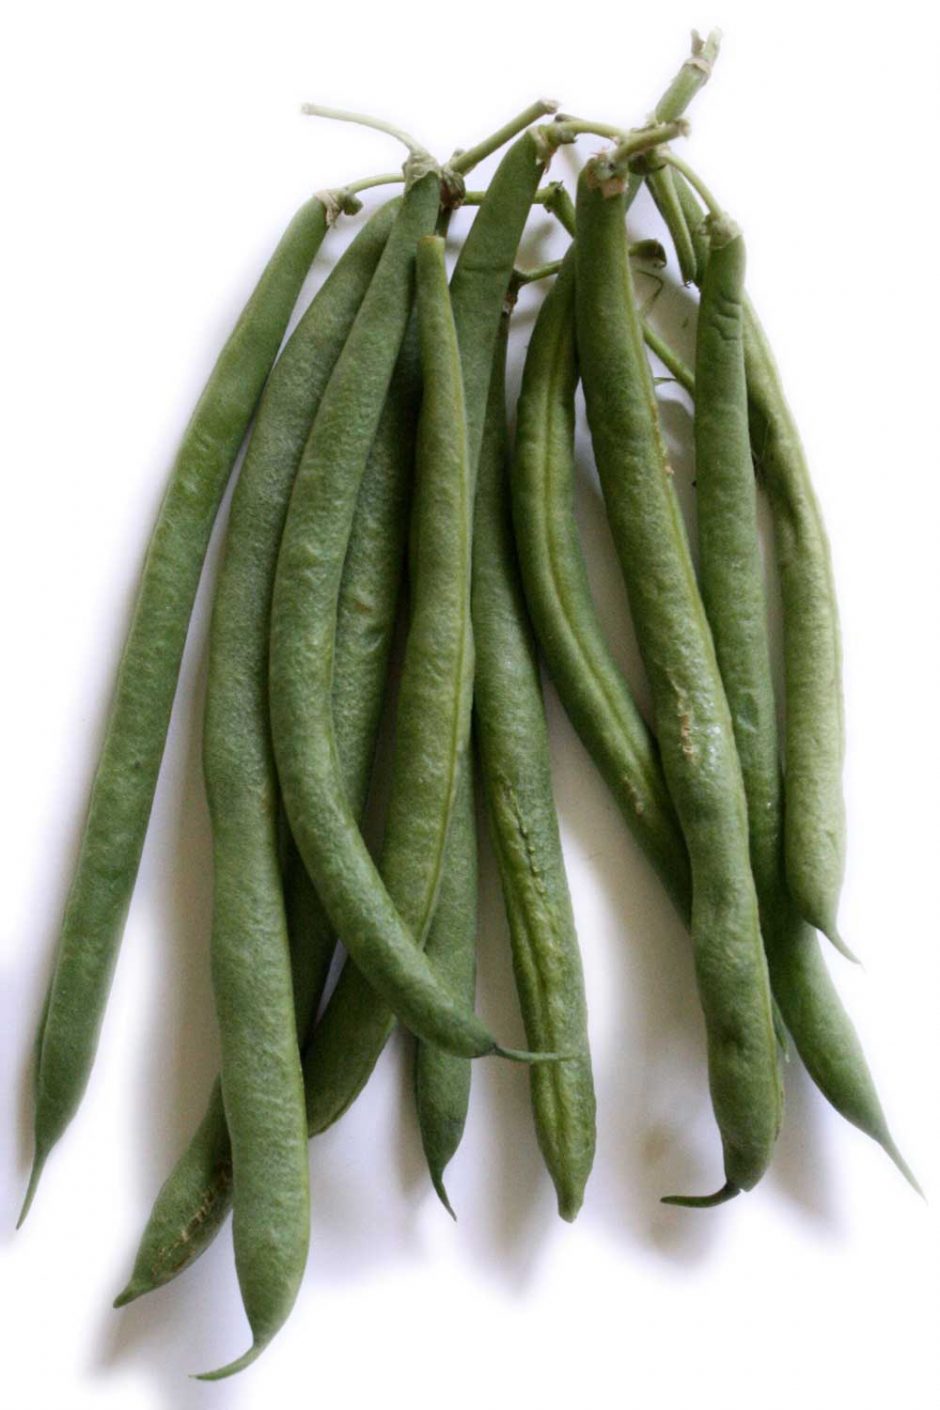 Grow delicious green beans in your own backyard